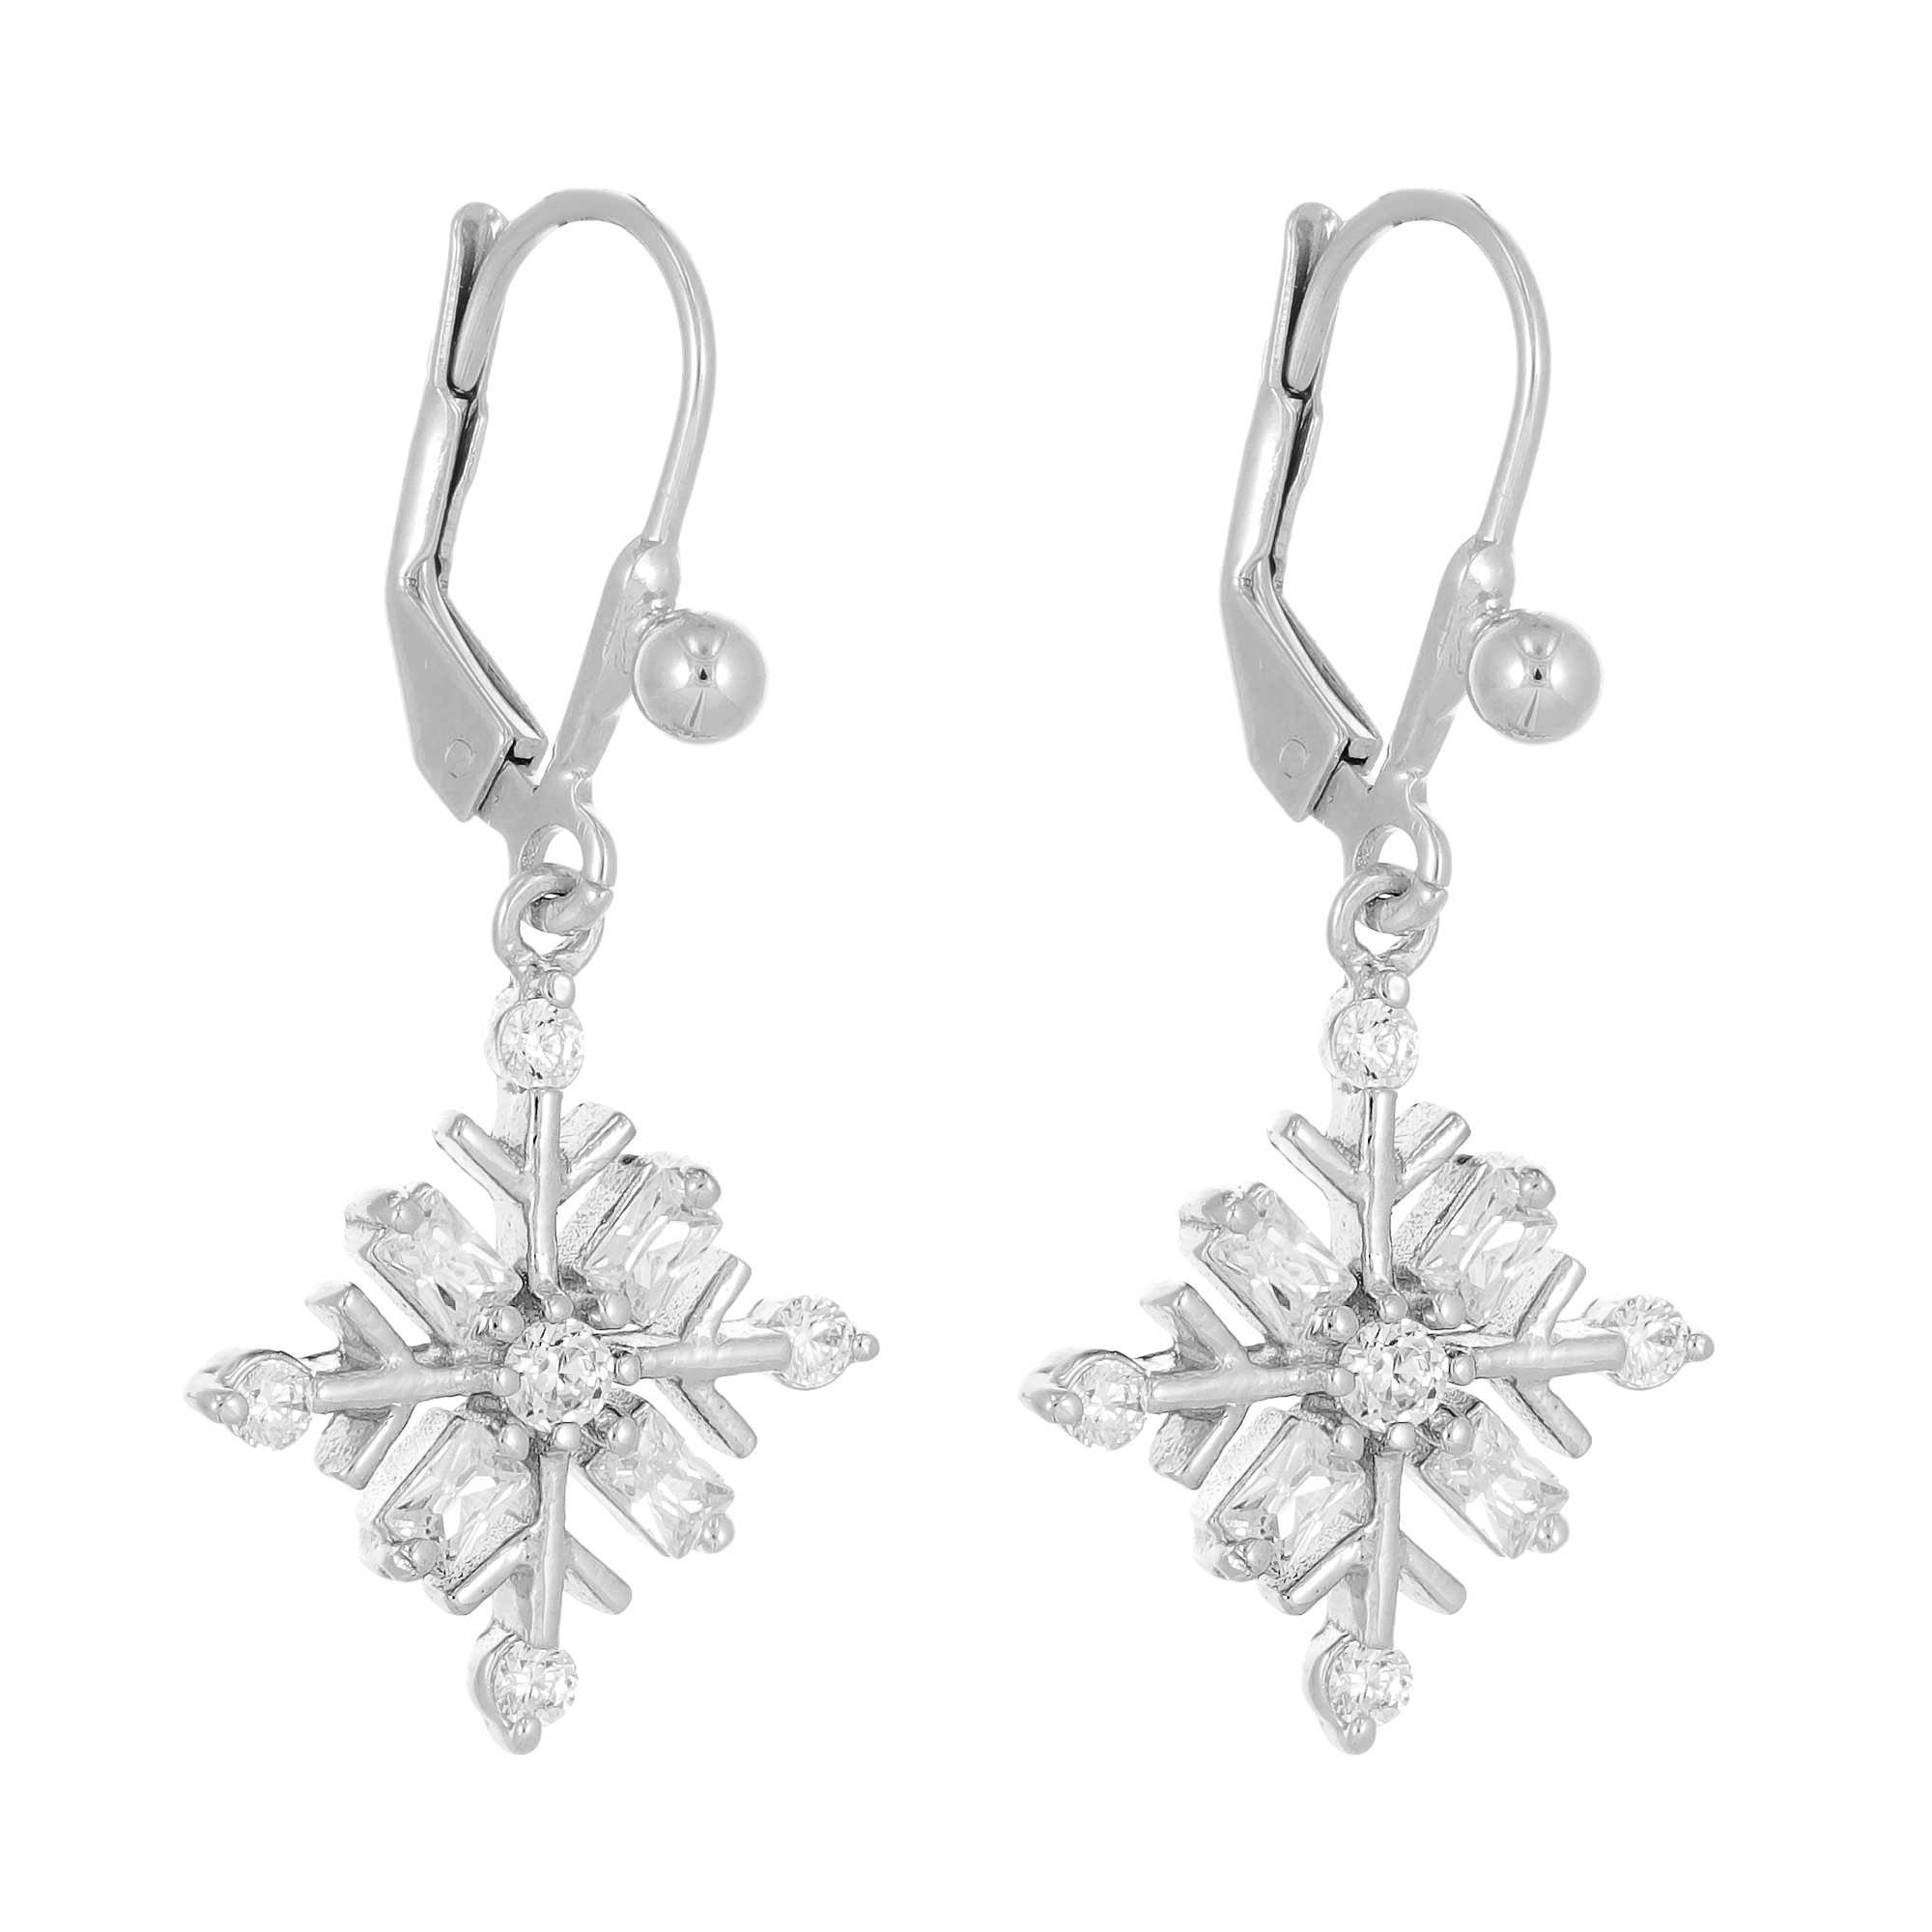 Lavari Jewelers Women's Flurry Snowflake Dangle Earring with Lever Back, 925 Sterling Silver, Cubic Zirconia